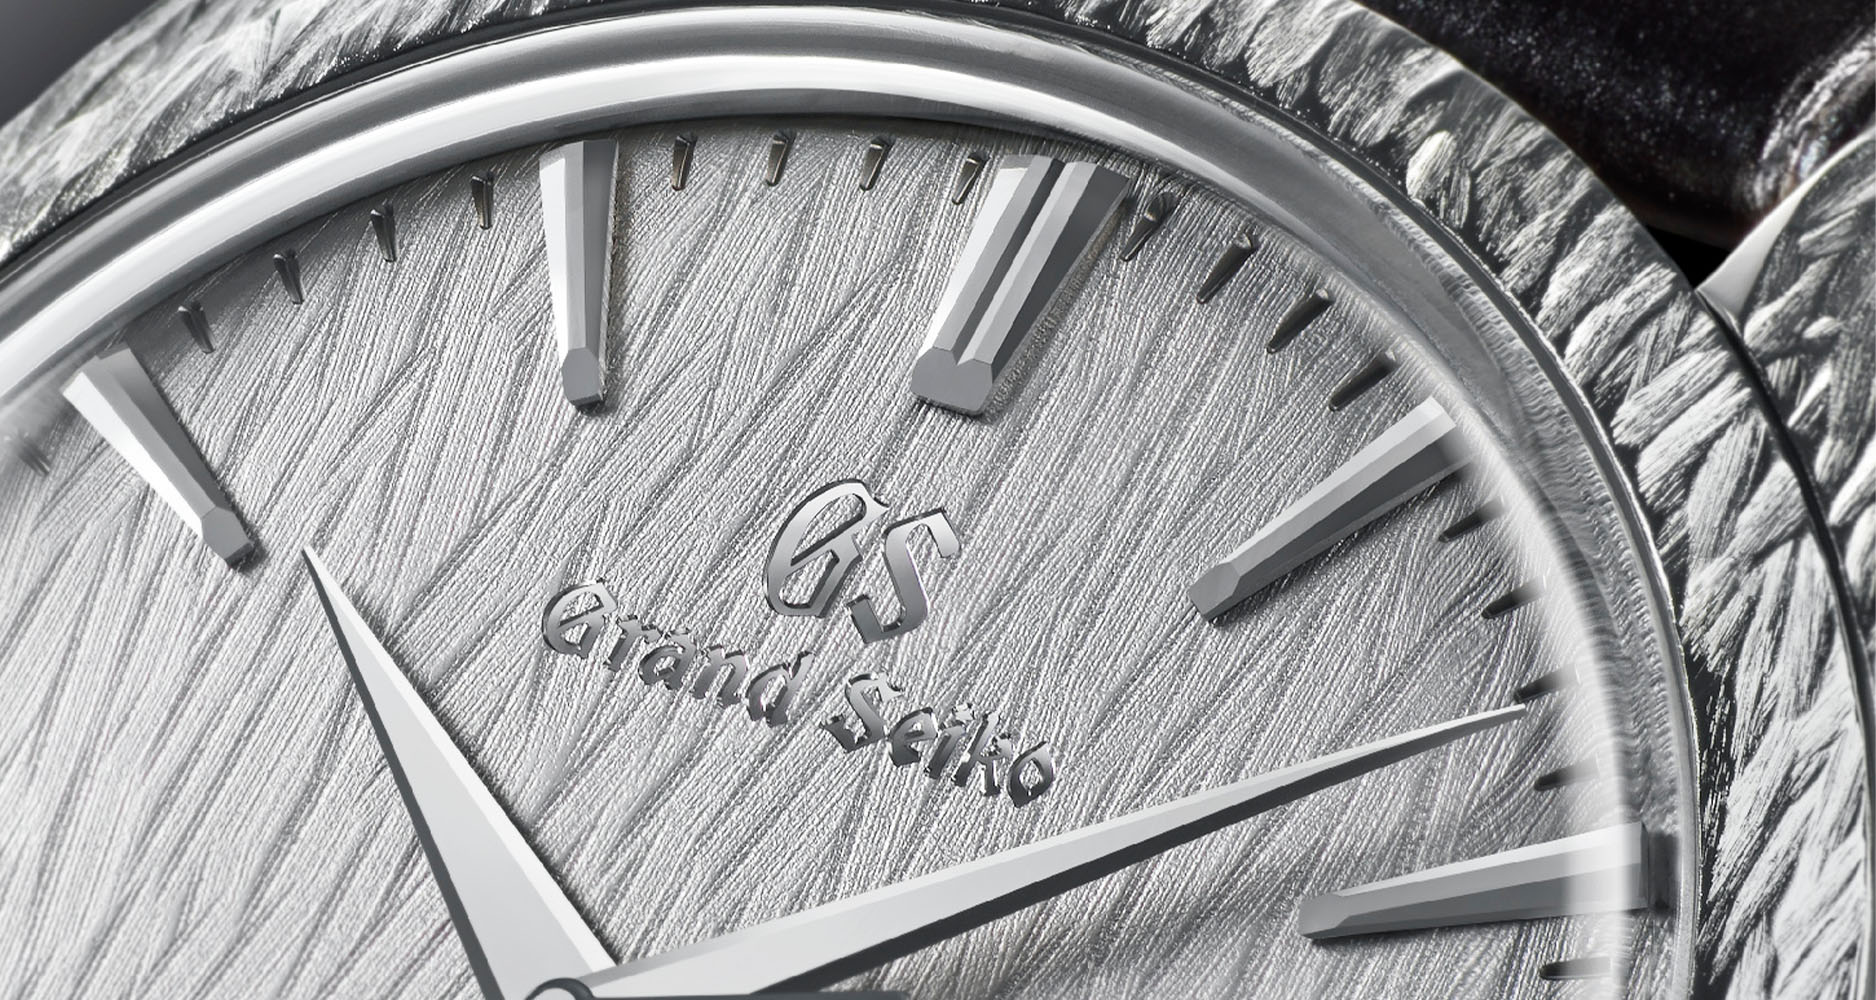 The dial of the Grand Seiko Masterpiece Collection Limited Edition SBGZ009 features hand-engraved details.